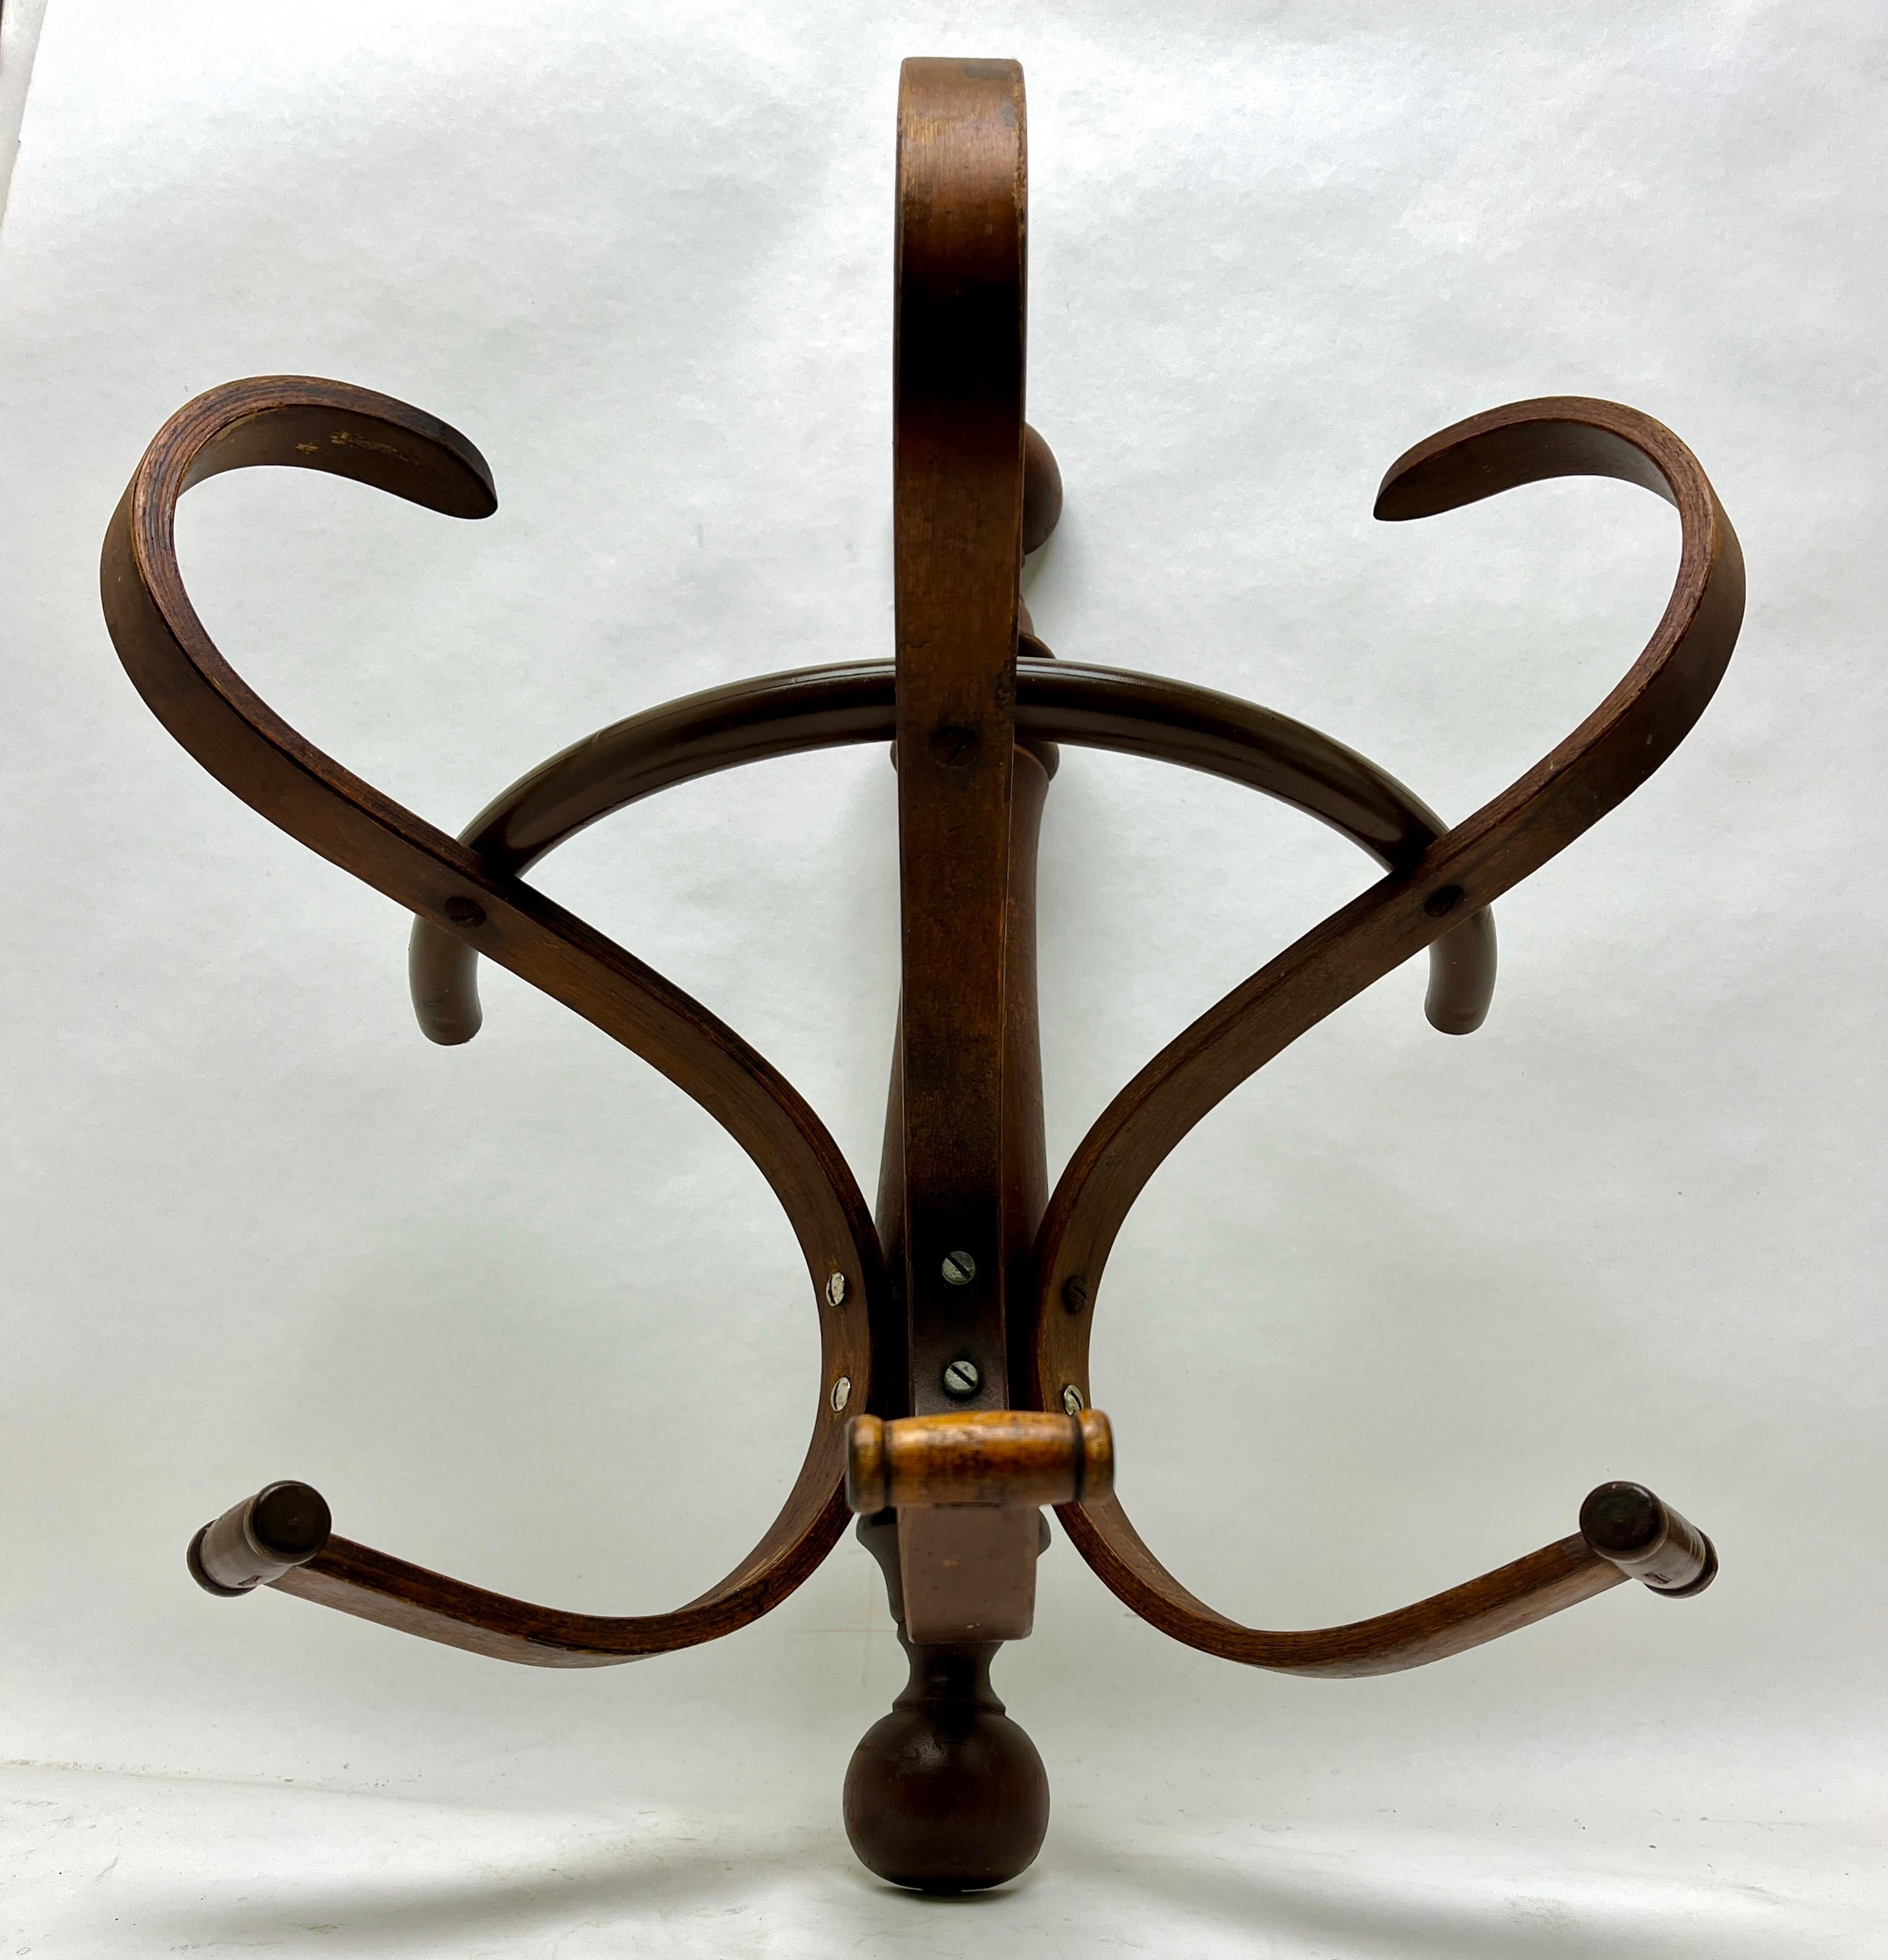 Art Nouveau bentwood wall coat rack style of Thonet, Vienna, 1910s
Original early 20th century Art Nouveau bentwood wall mount coat rack, in walnut.
Good conditions.
.